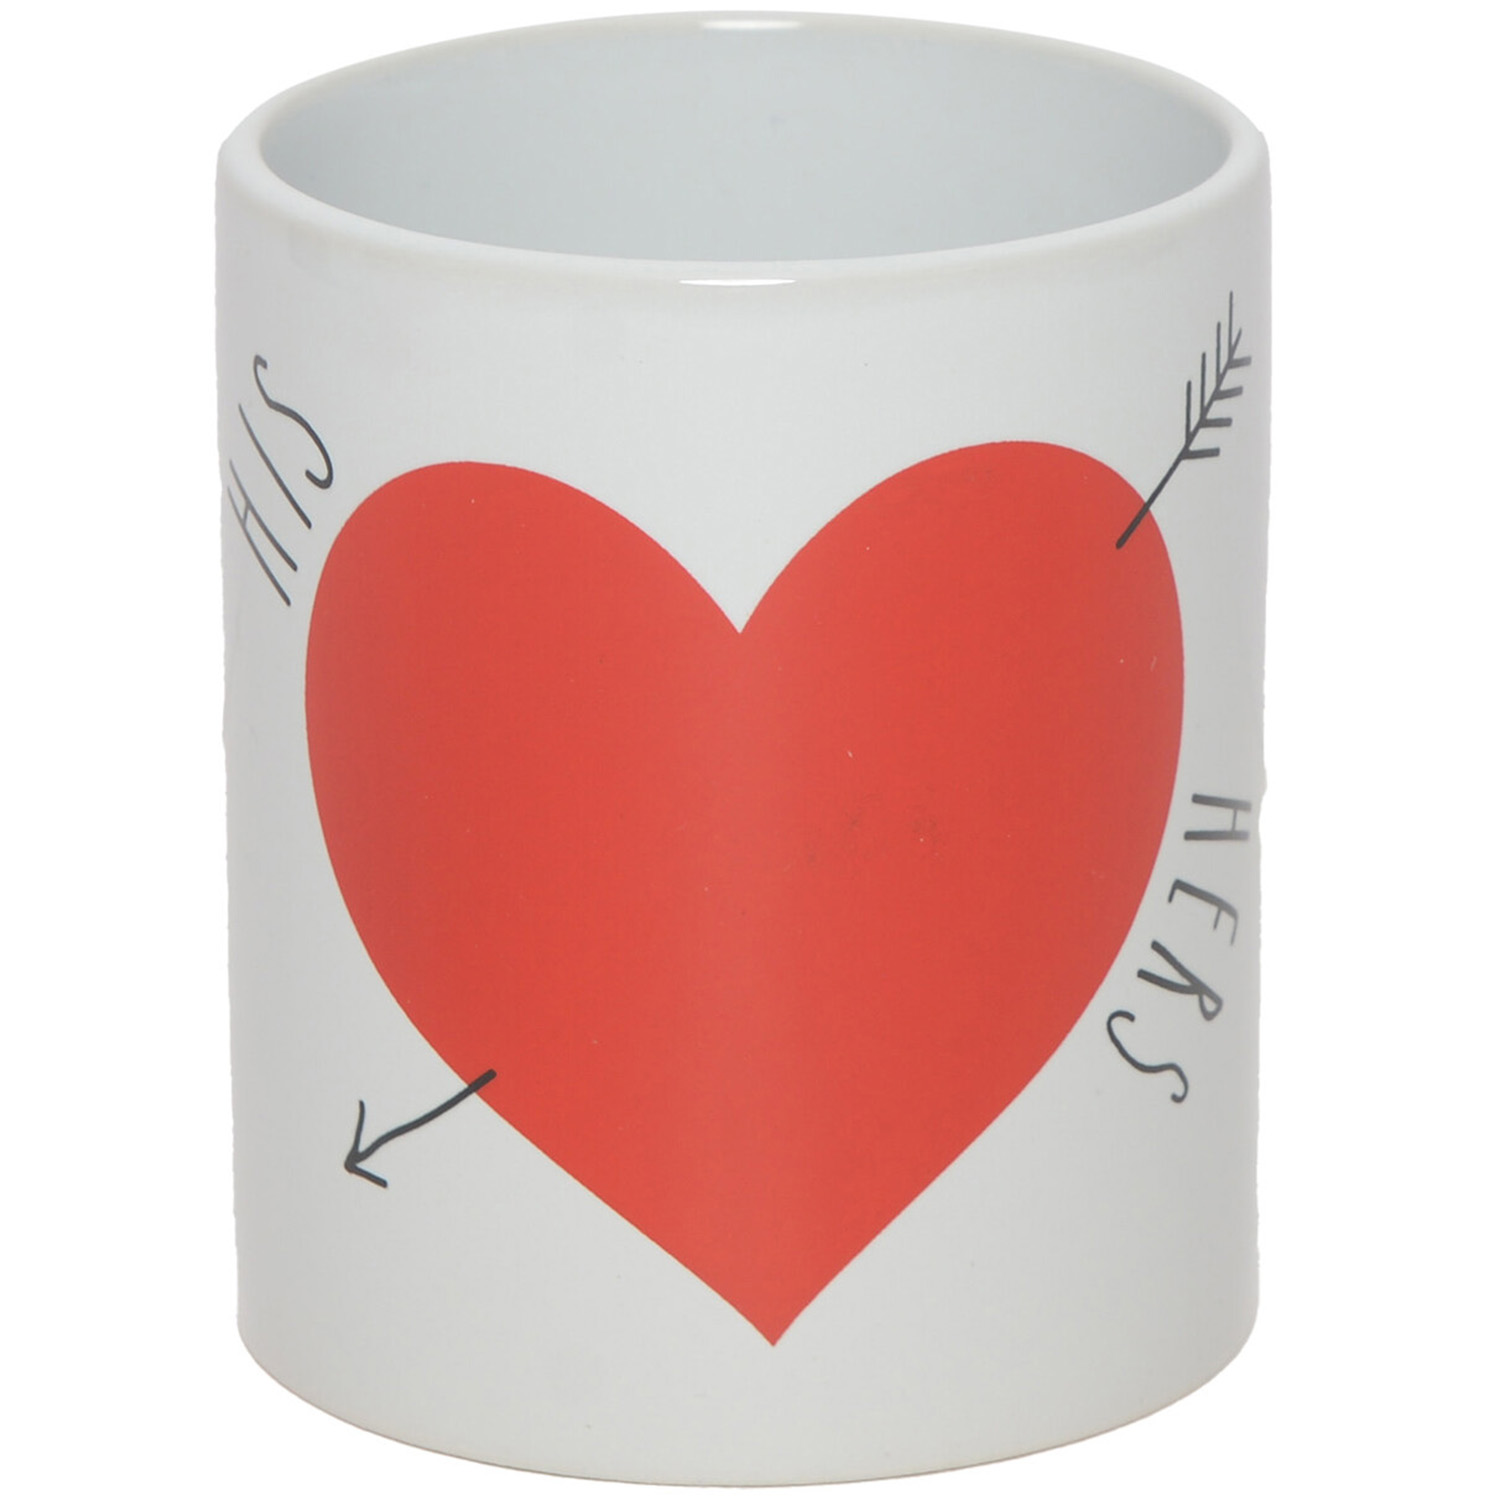 Set of His and Hers Mugs - White Image 1